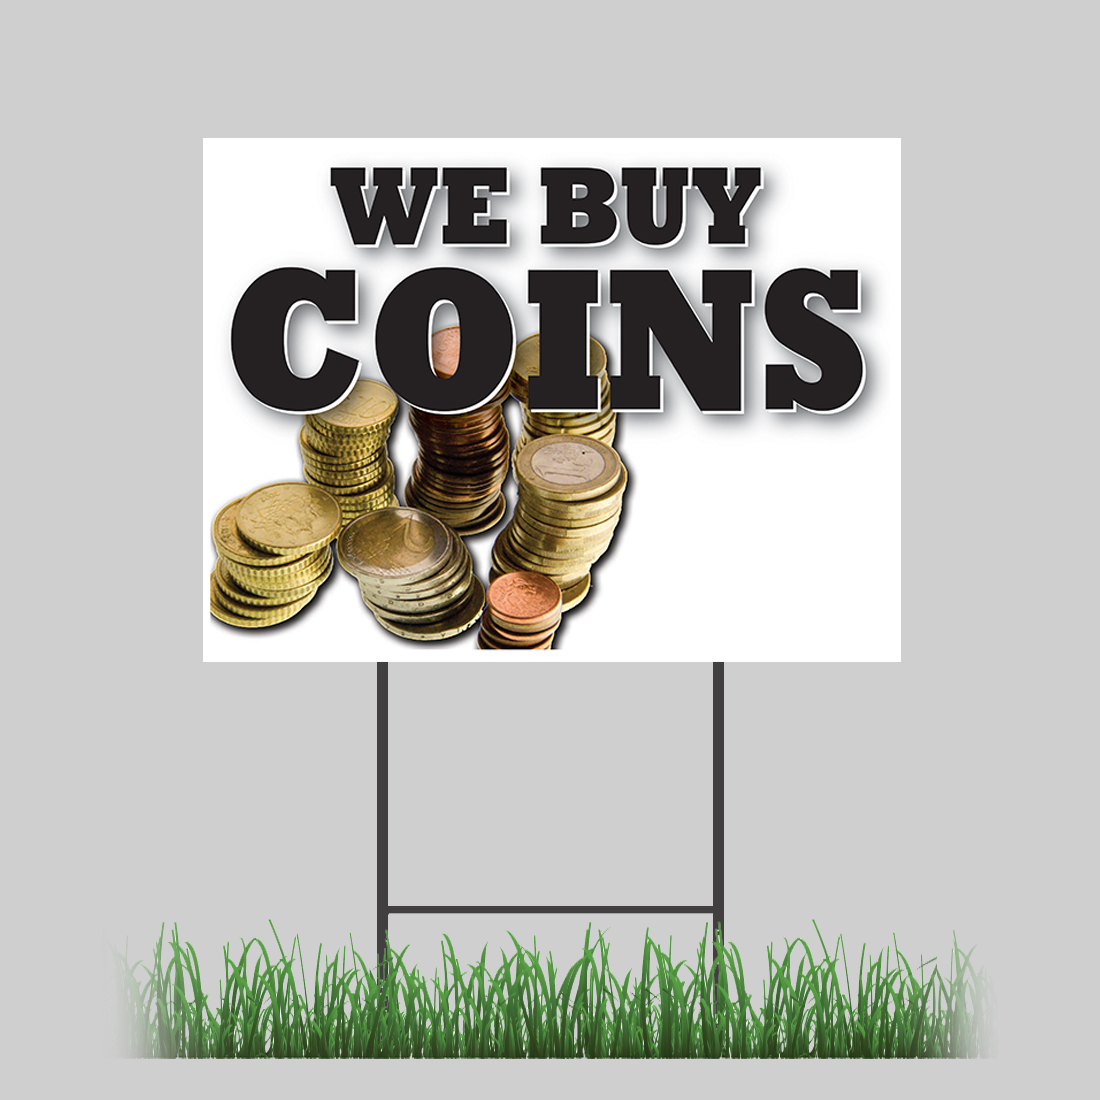 coins sign up